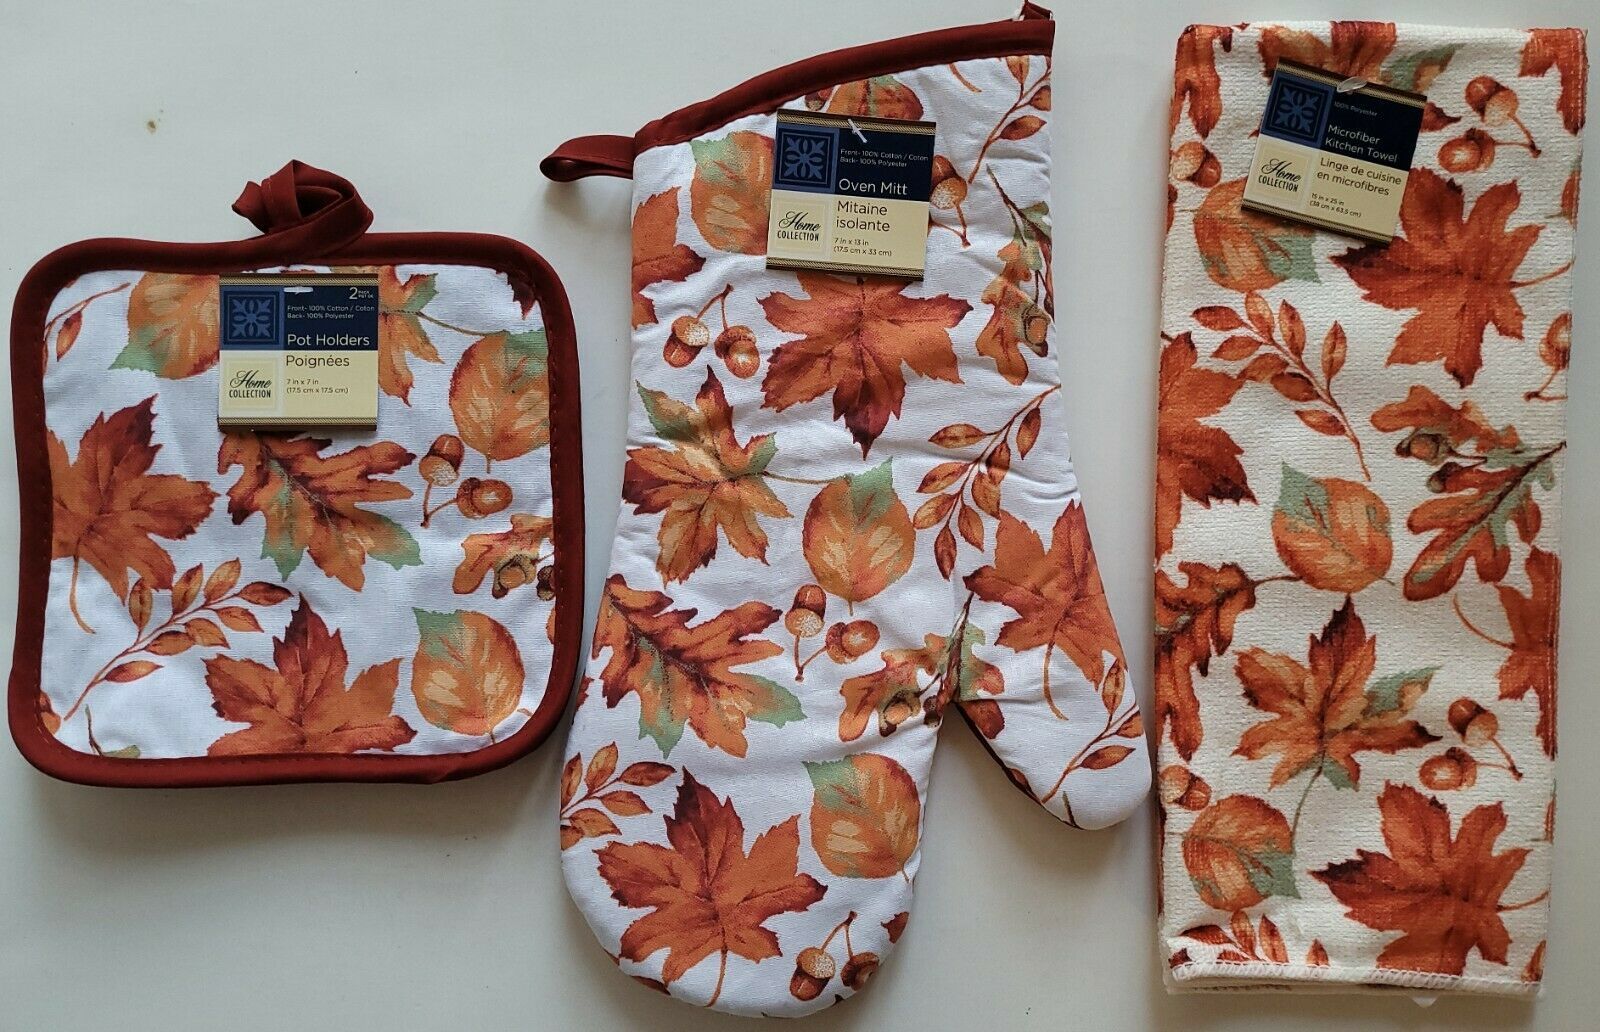 Fall Kitchen Linen Leaves Acorns S21 Oven Mitts Potholders Towels Select; Item - $2.96 - $7.91